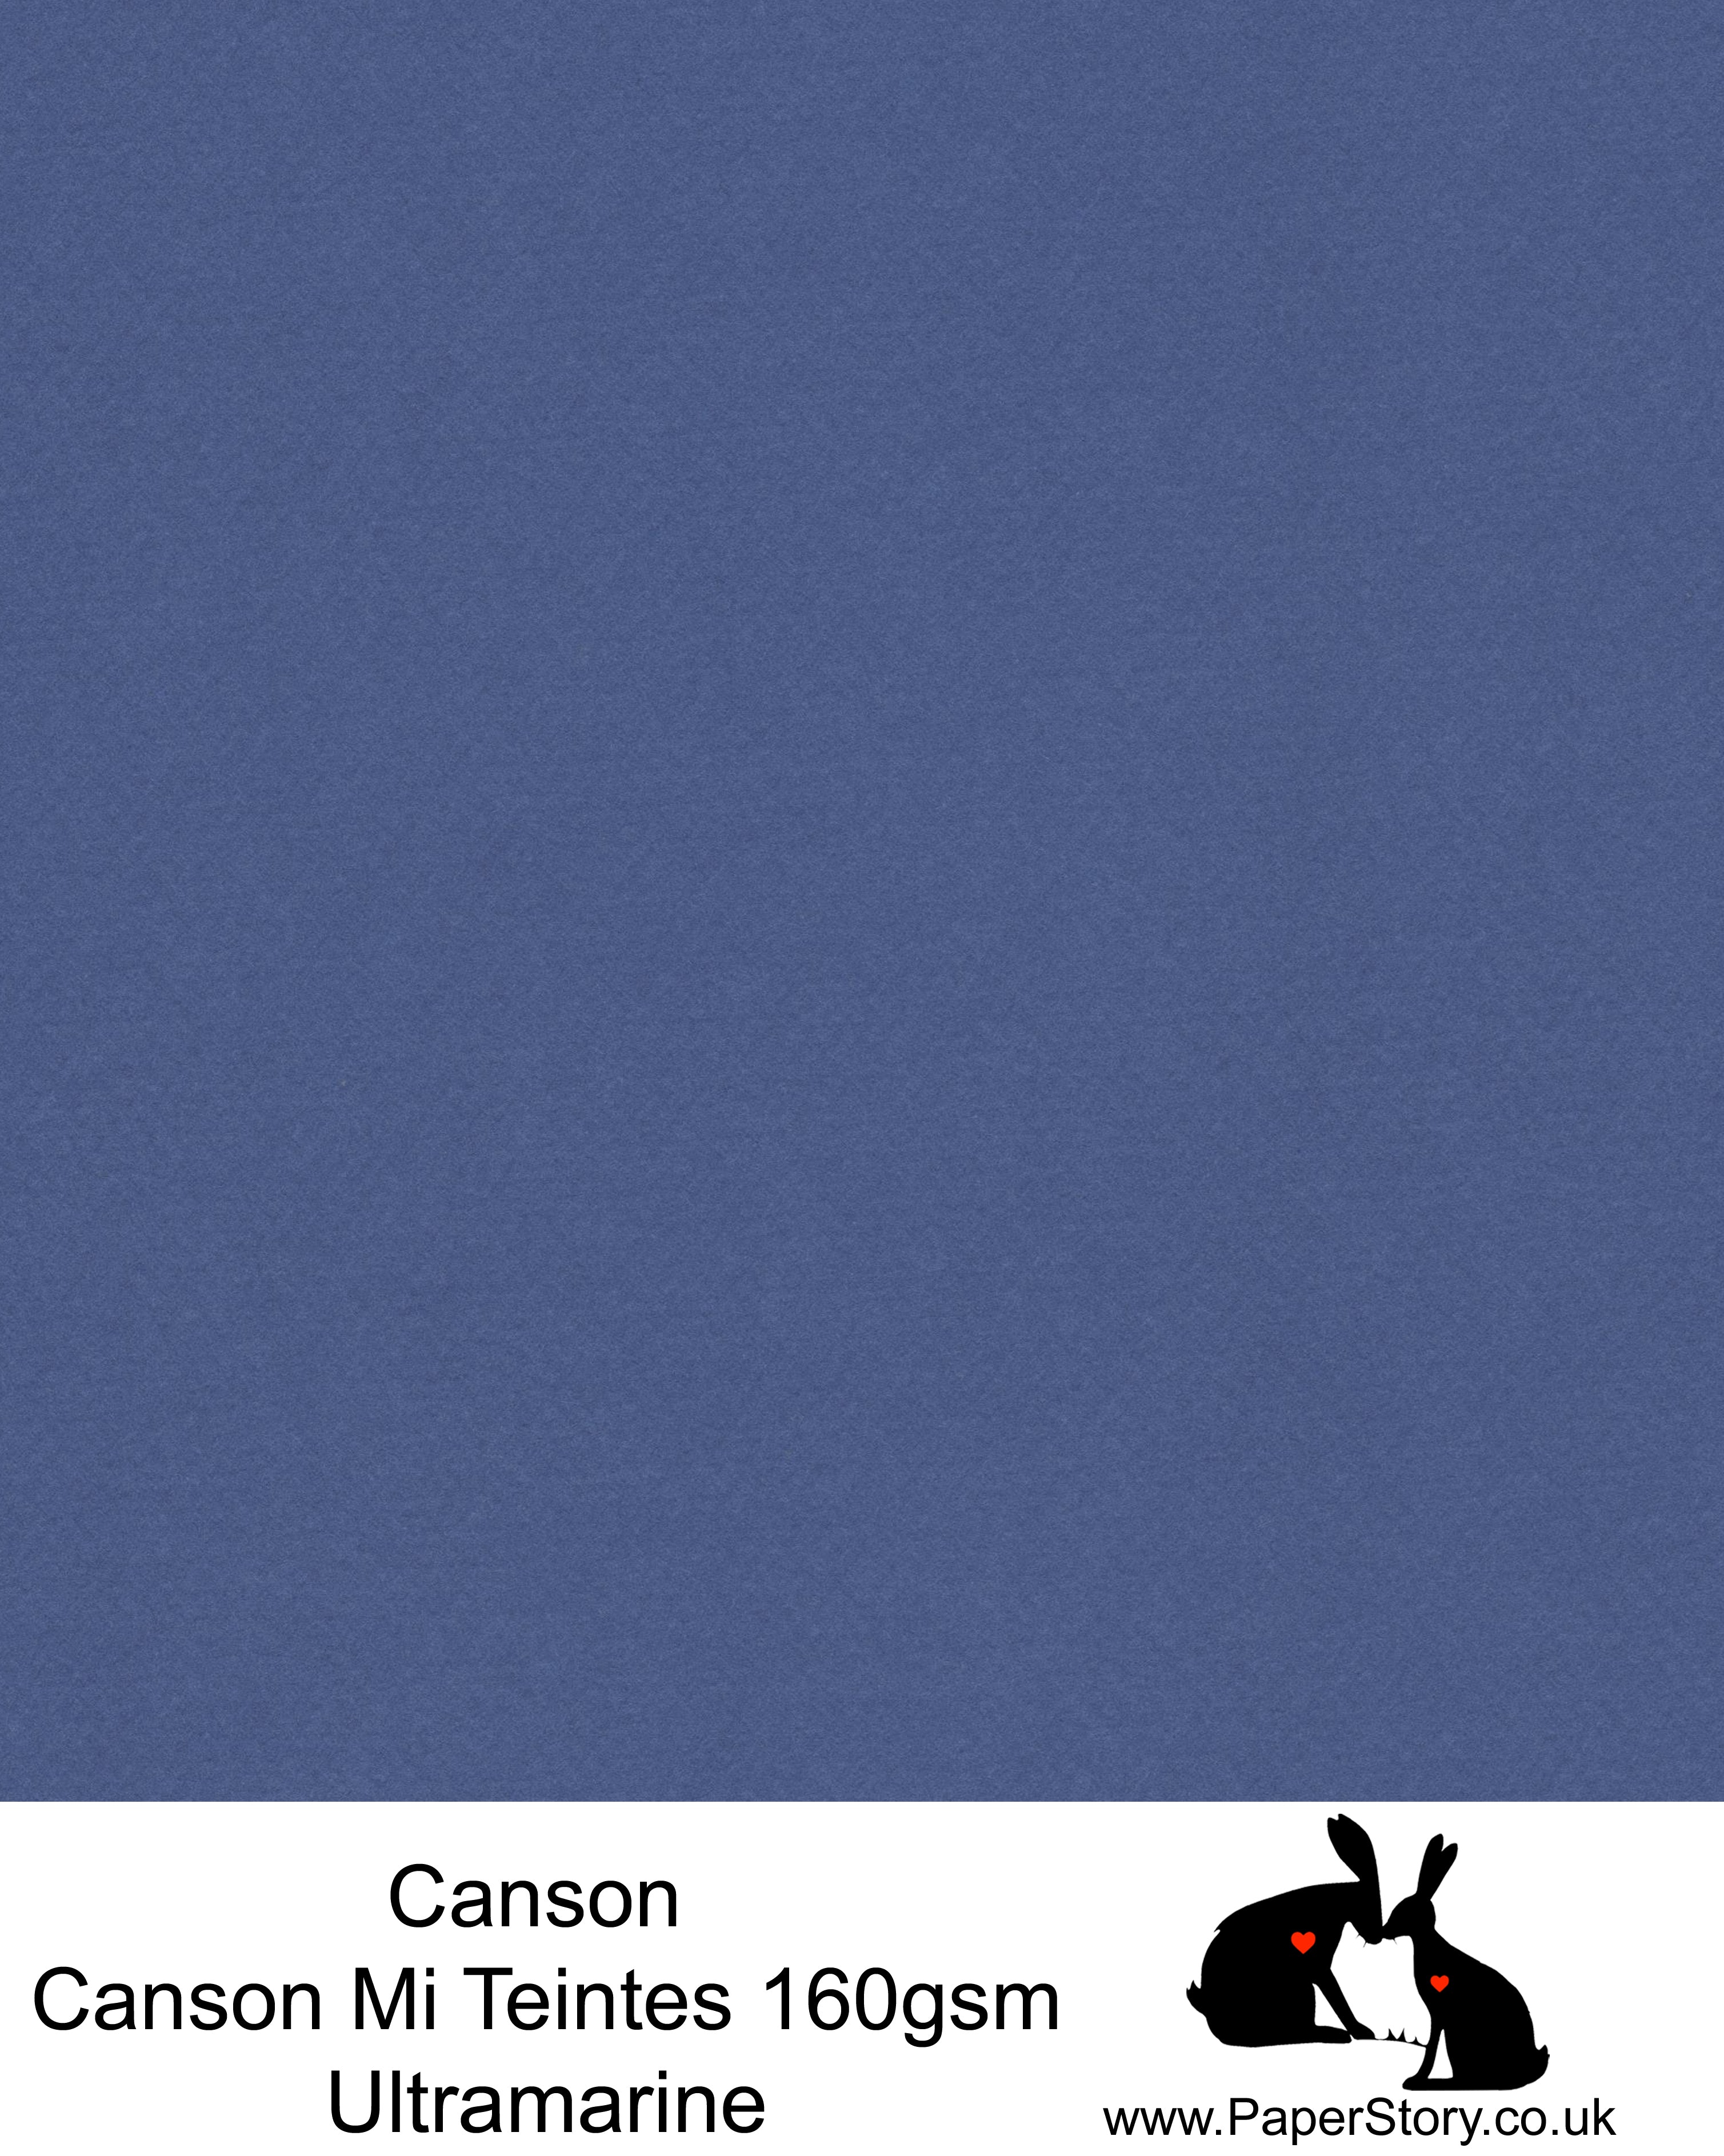 Canson Mi Teintes acid free, deep blue ultramarine, hammered texture honeycomb surface paper 160 gsm. This is a popular and classic paper for all artists especially well respected for Pastel  and Papercutting made famous by Paper Panda. This paper has a honeycombed finish one side and fine grain the other. An authentic art paper, acid free with a  very high 50% cotton content. Canson Mi-Teintes complies with the ISO 9706 standard on permanence, a guarantee of excellent conservation